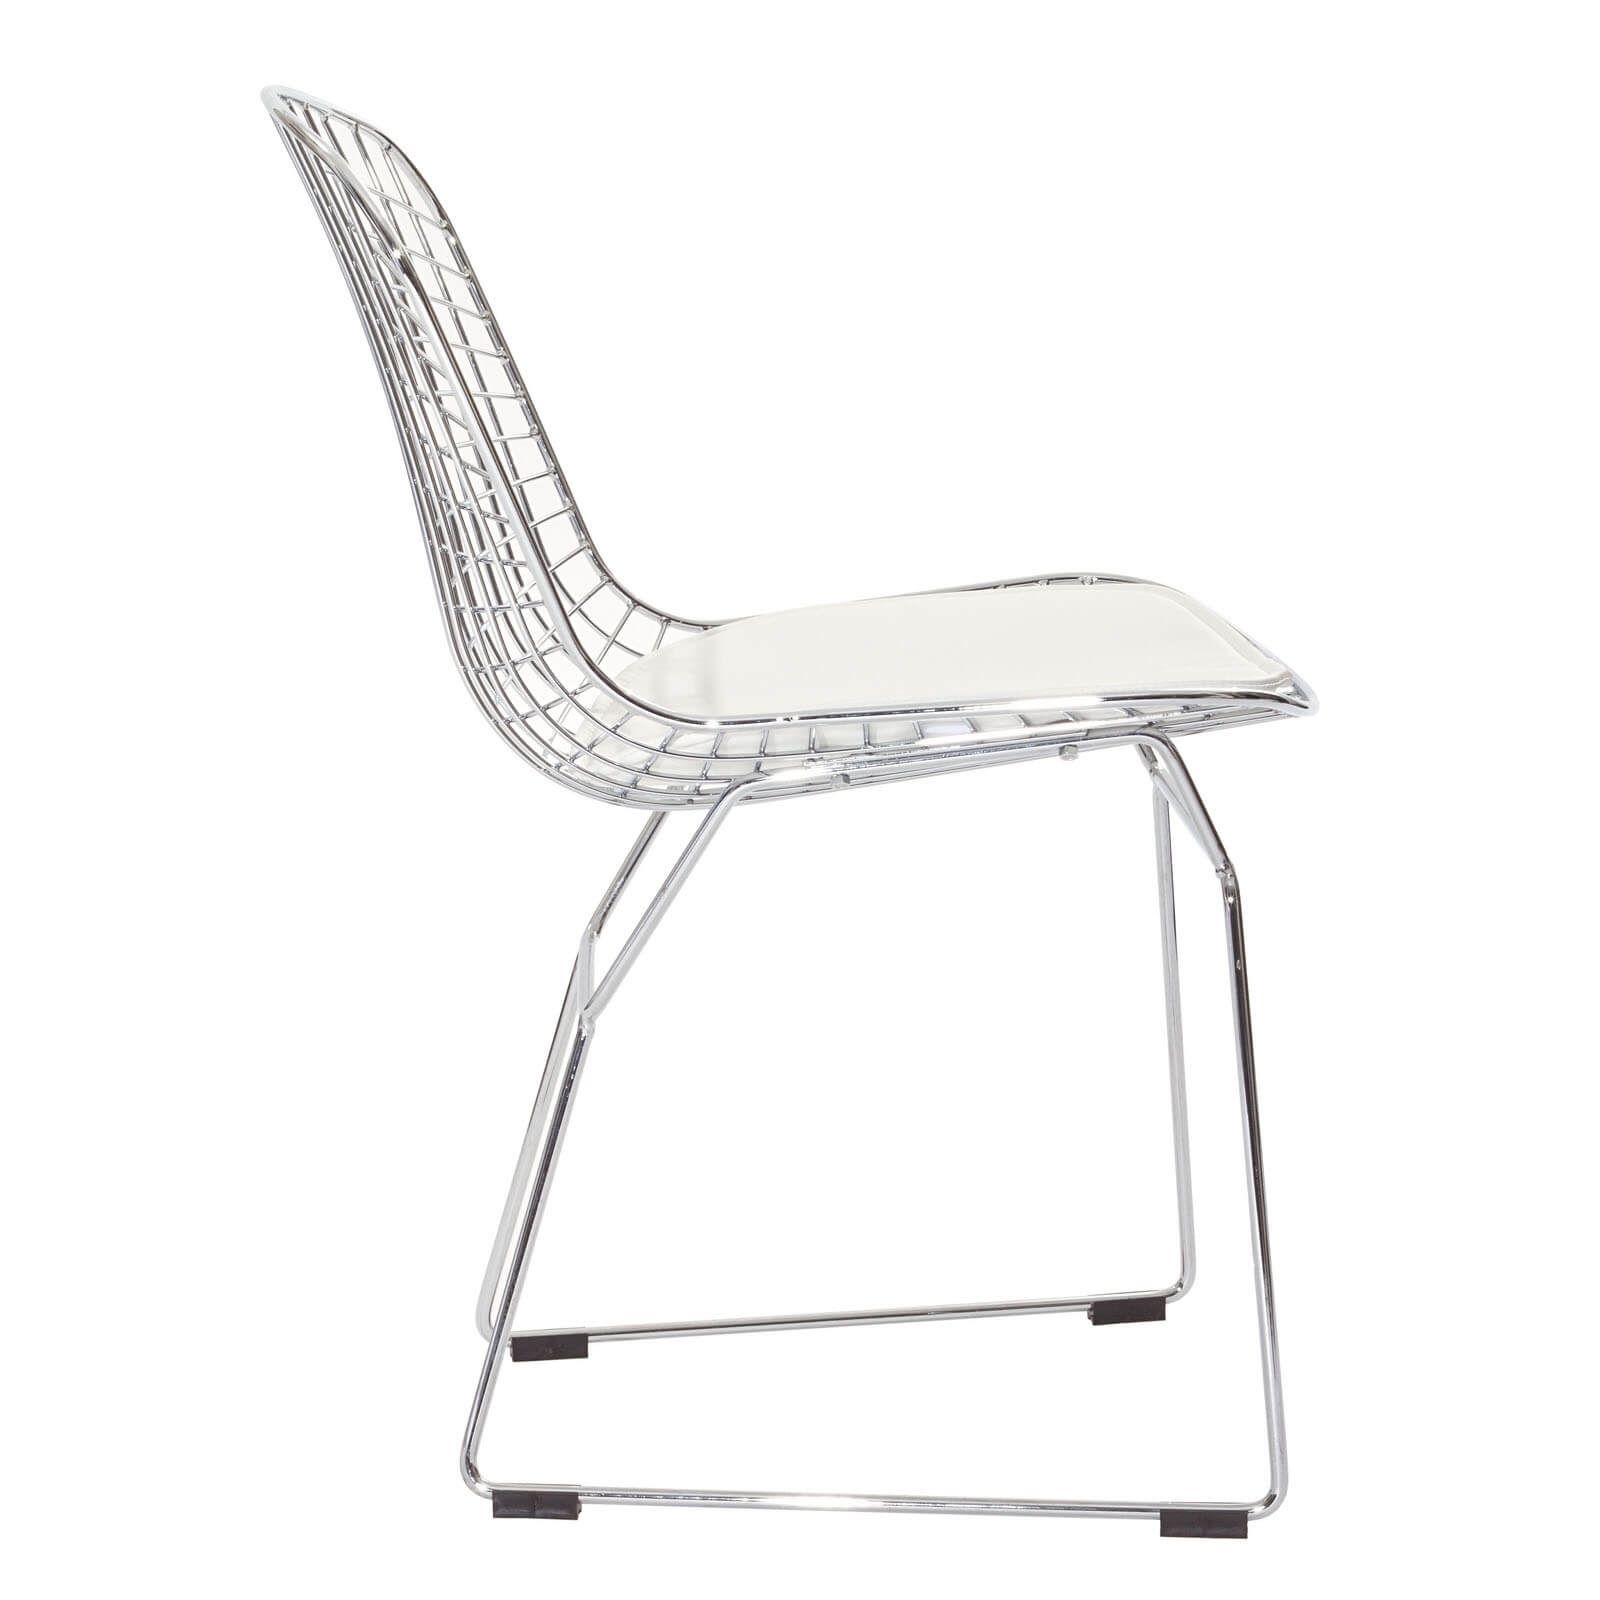 Bistro metal chair side view